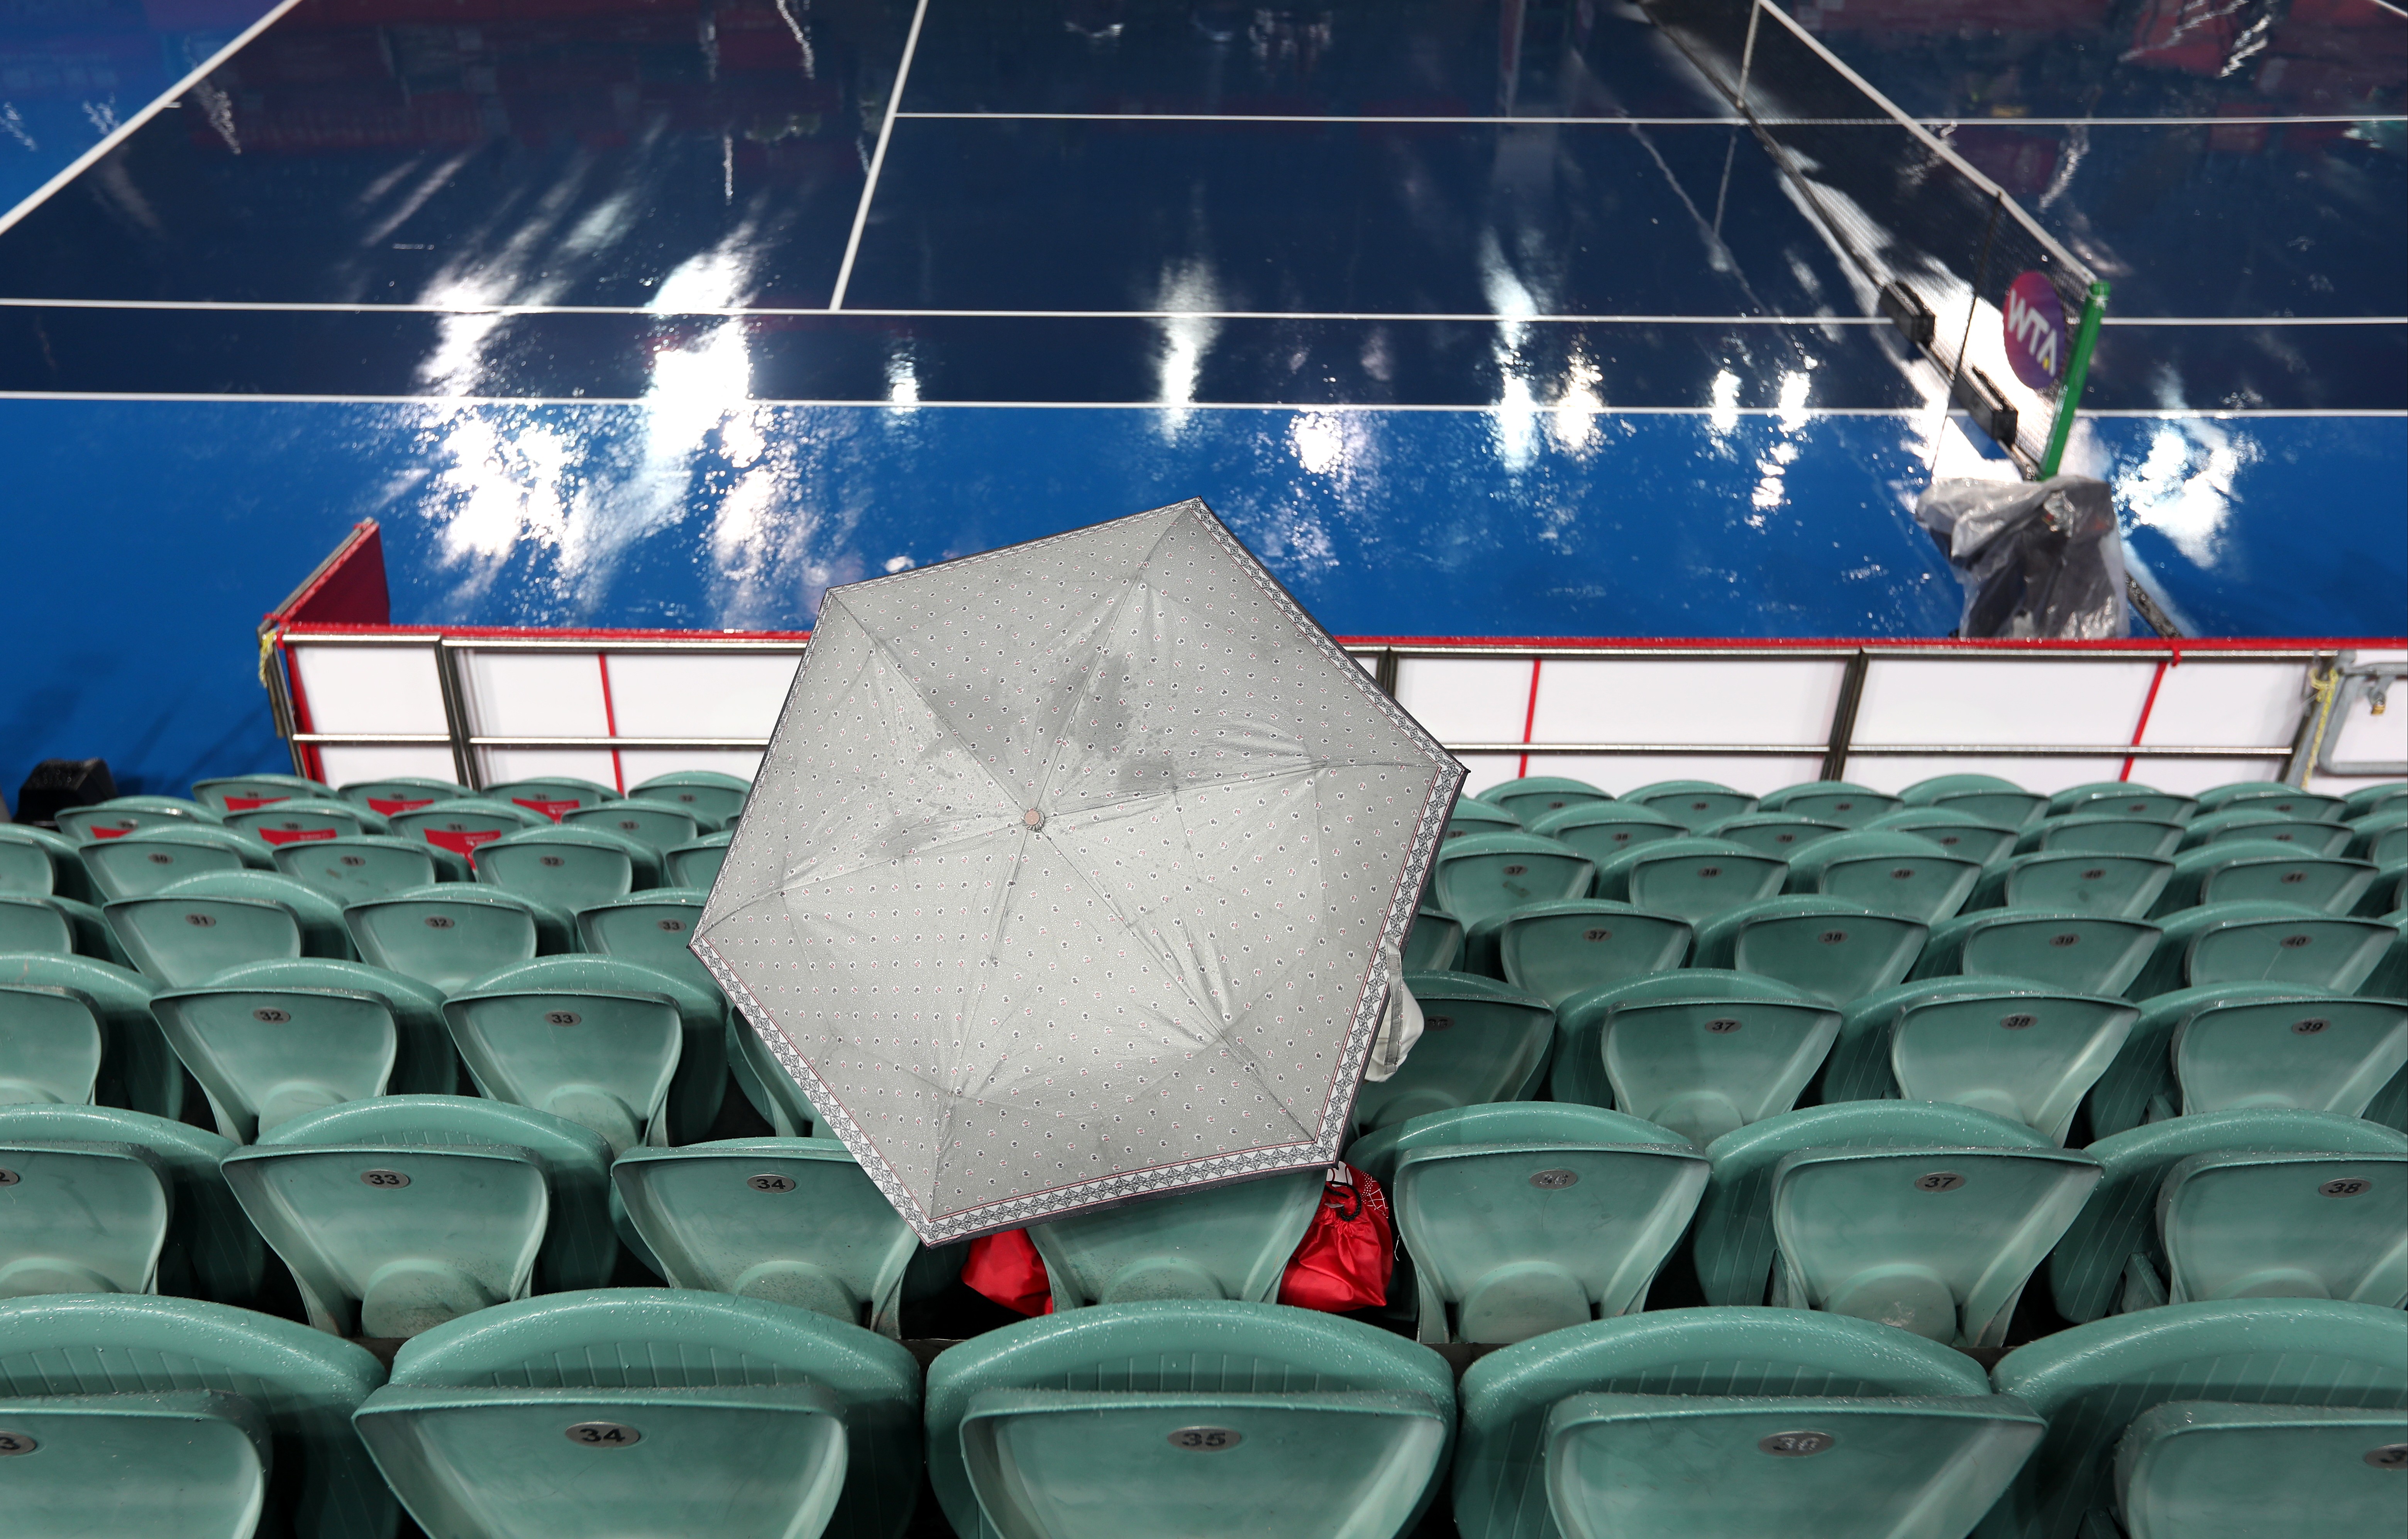 A spectator waits for the rain to stop on Centre Court at Victoria Park for the Prudential Hong Kong Tennis Open. Photos: Xiaomei Chen